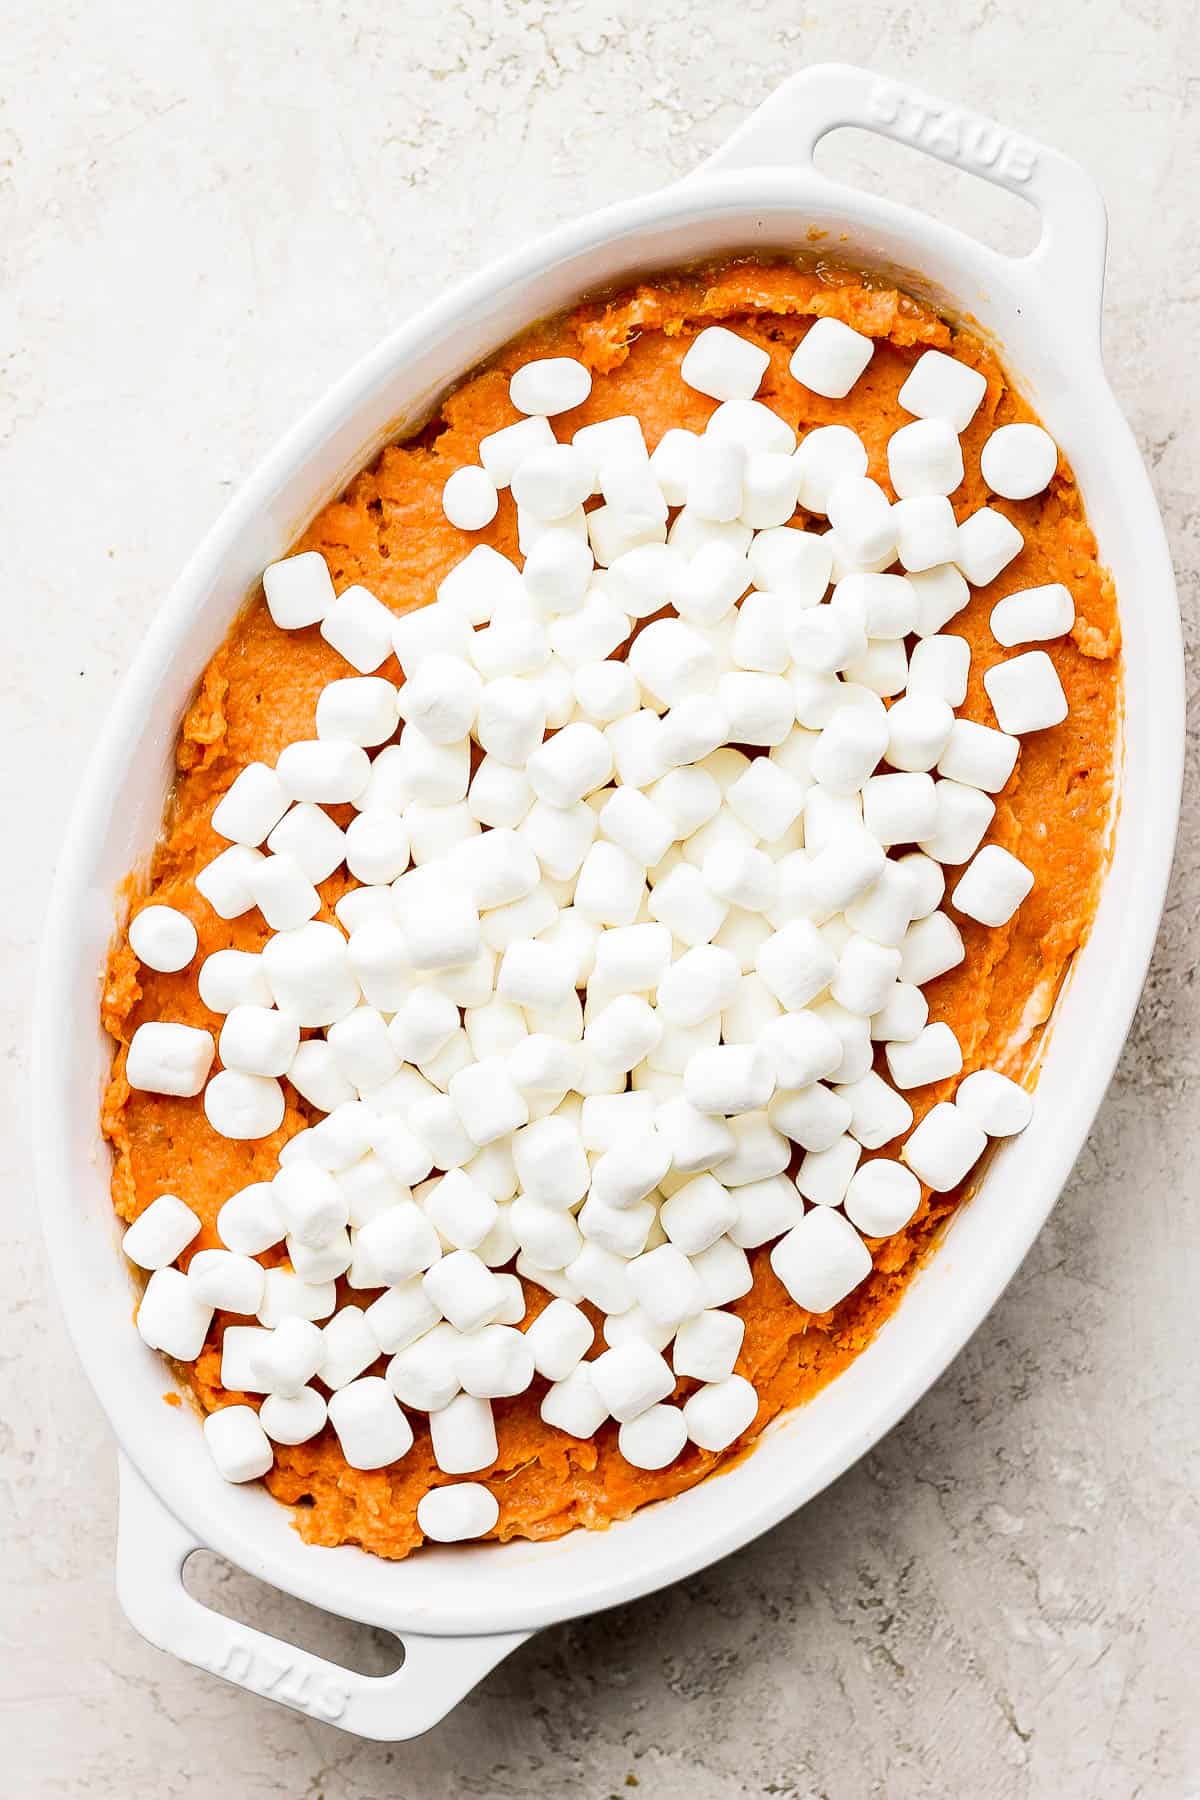 Mini marshmallows spread evenly on top of the sweet potato mixture in the casserole dish.